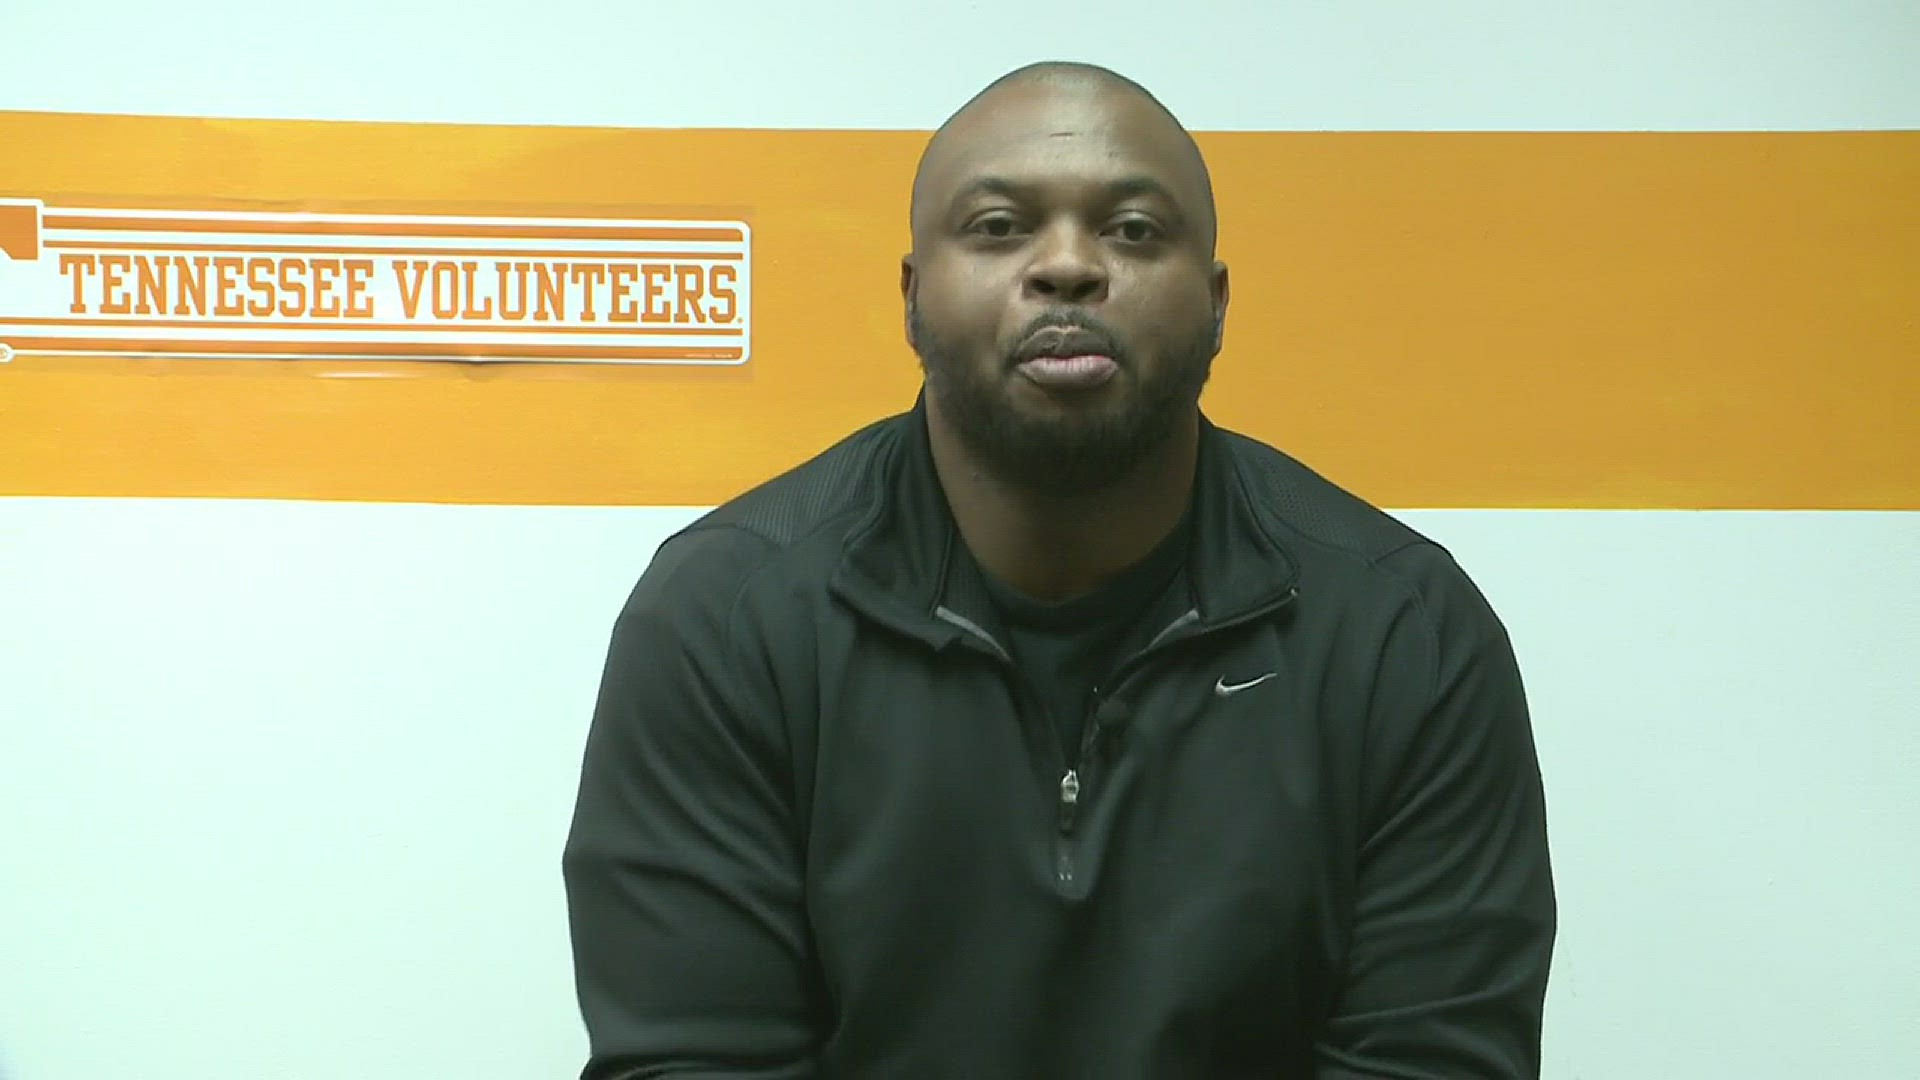 VFL Jayson Swain gives his three most important keys for Tennessee to secure a must-win game against the Missouri Tigers.